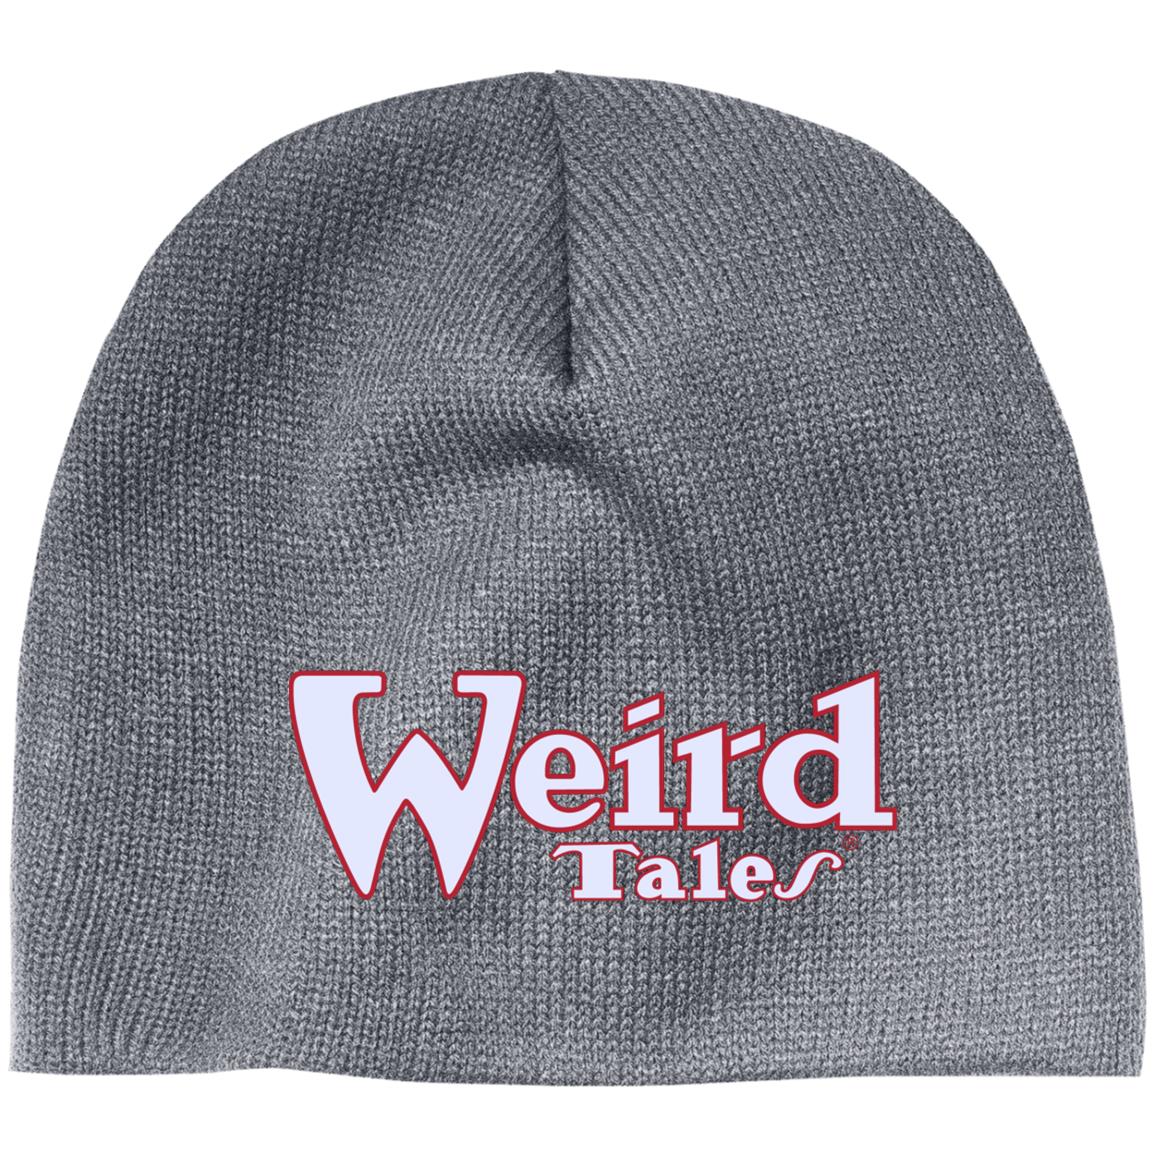 Weird Tales Logo White-Red Embroidered 100% Acrylic Beanie